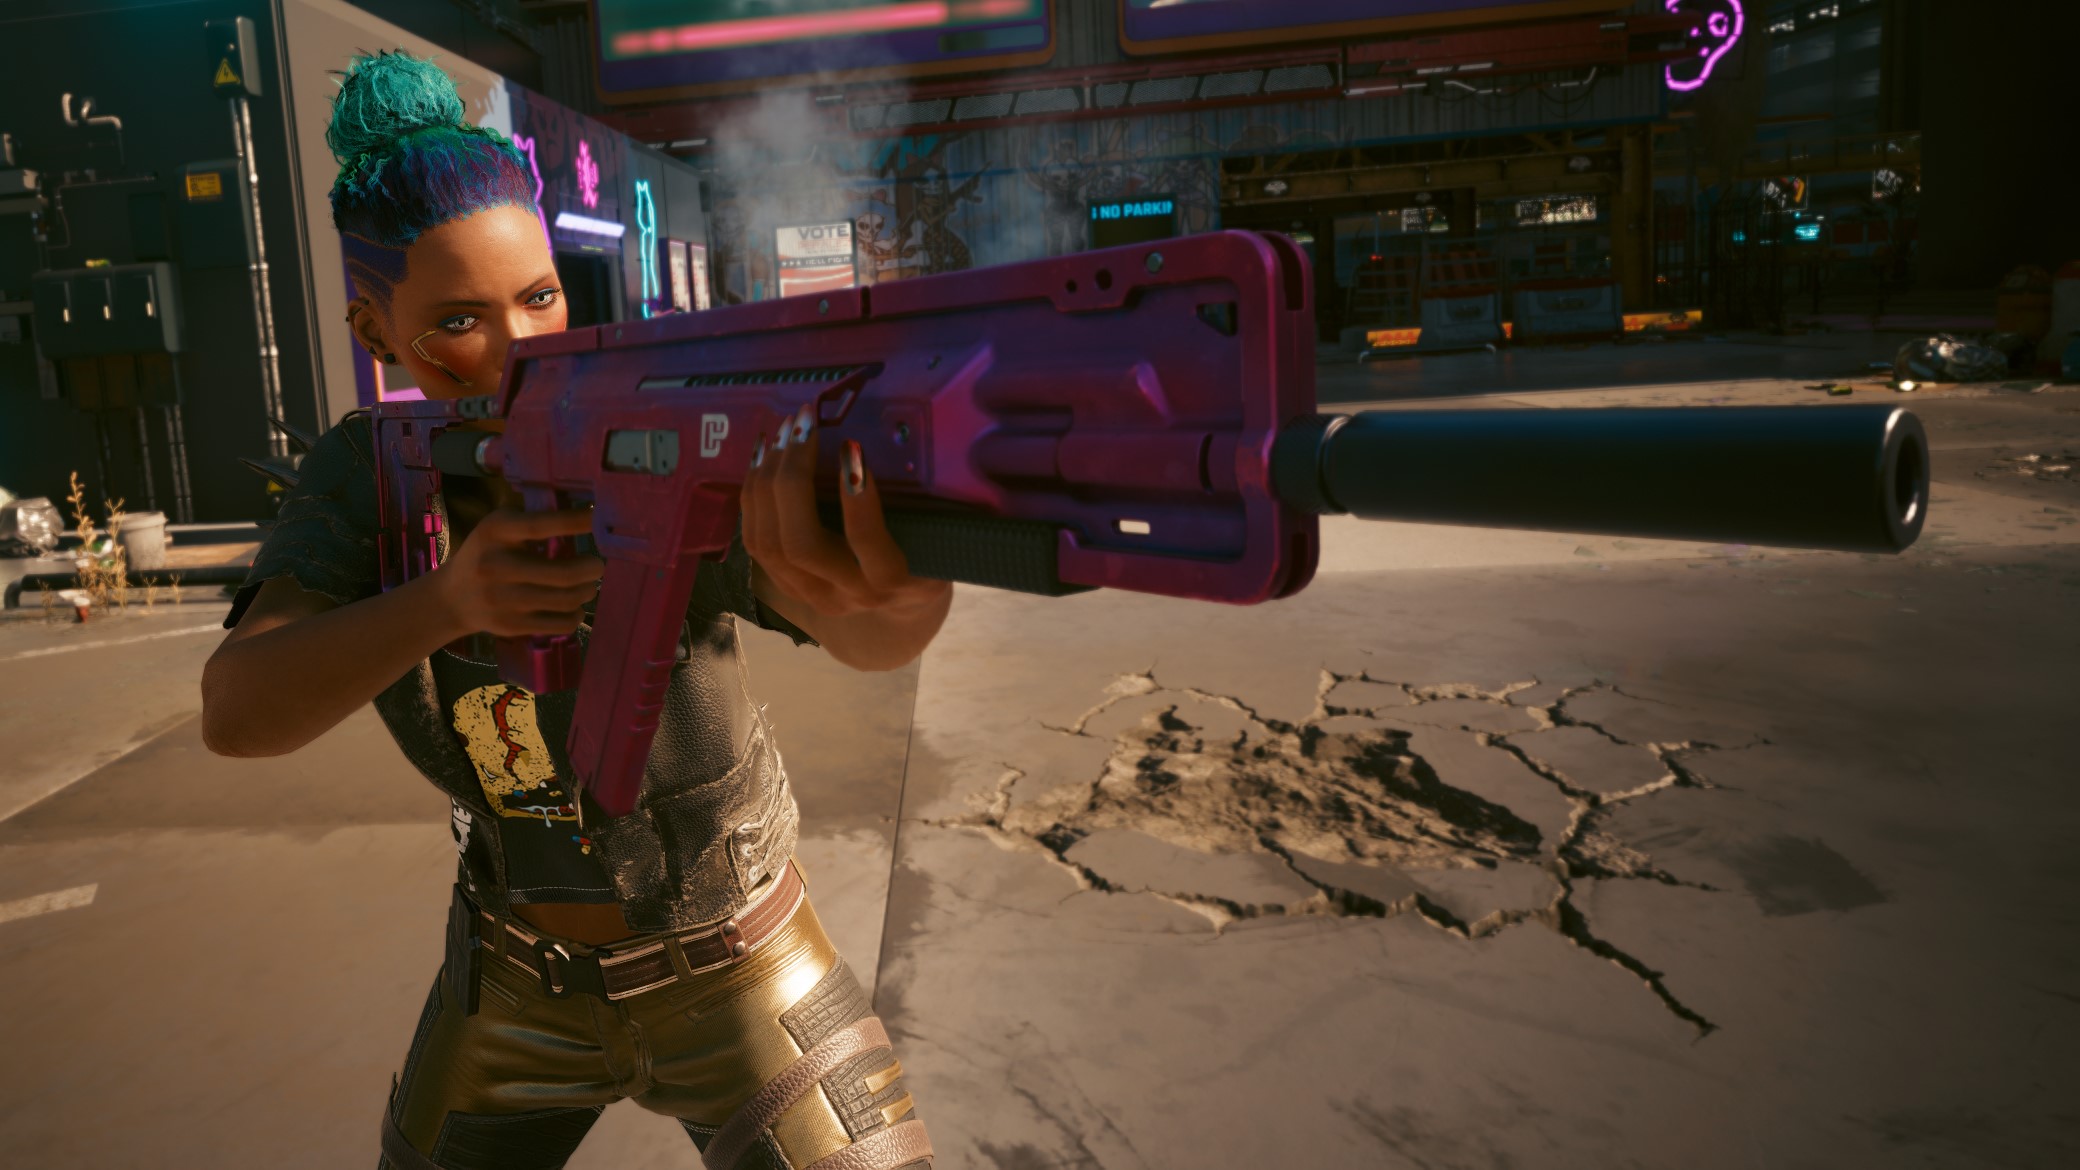 Cyberpunk 2077 Weapon Animations Change as You Get Better at Using Them